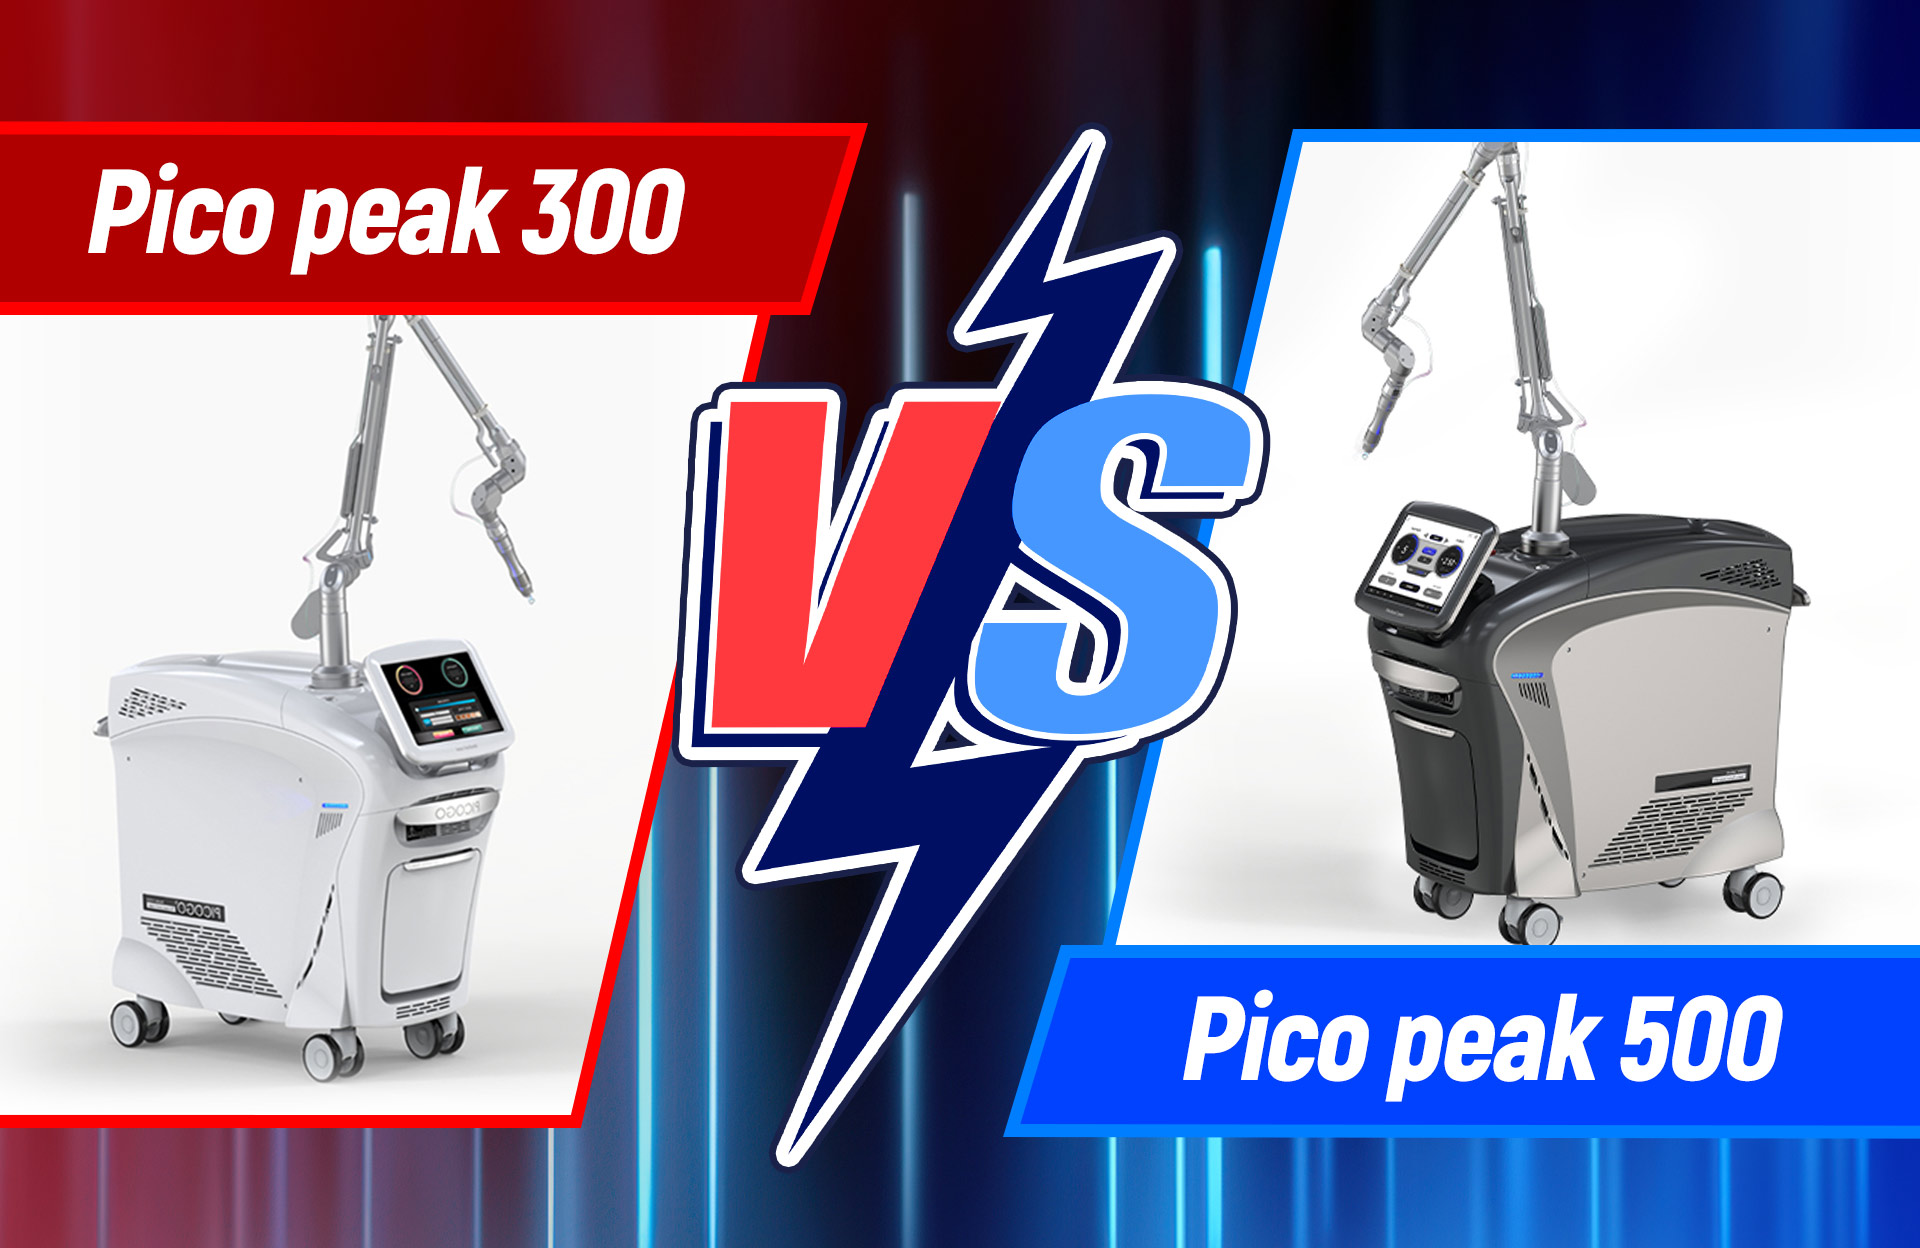 Understanding the Differences Between Picospeak 300 and 500 in One Article